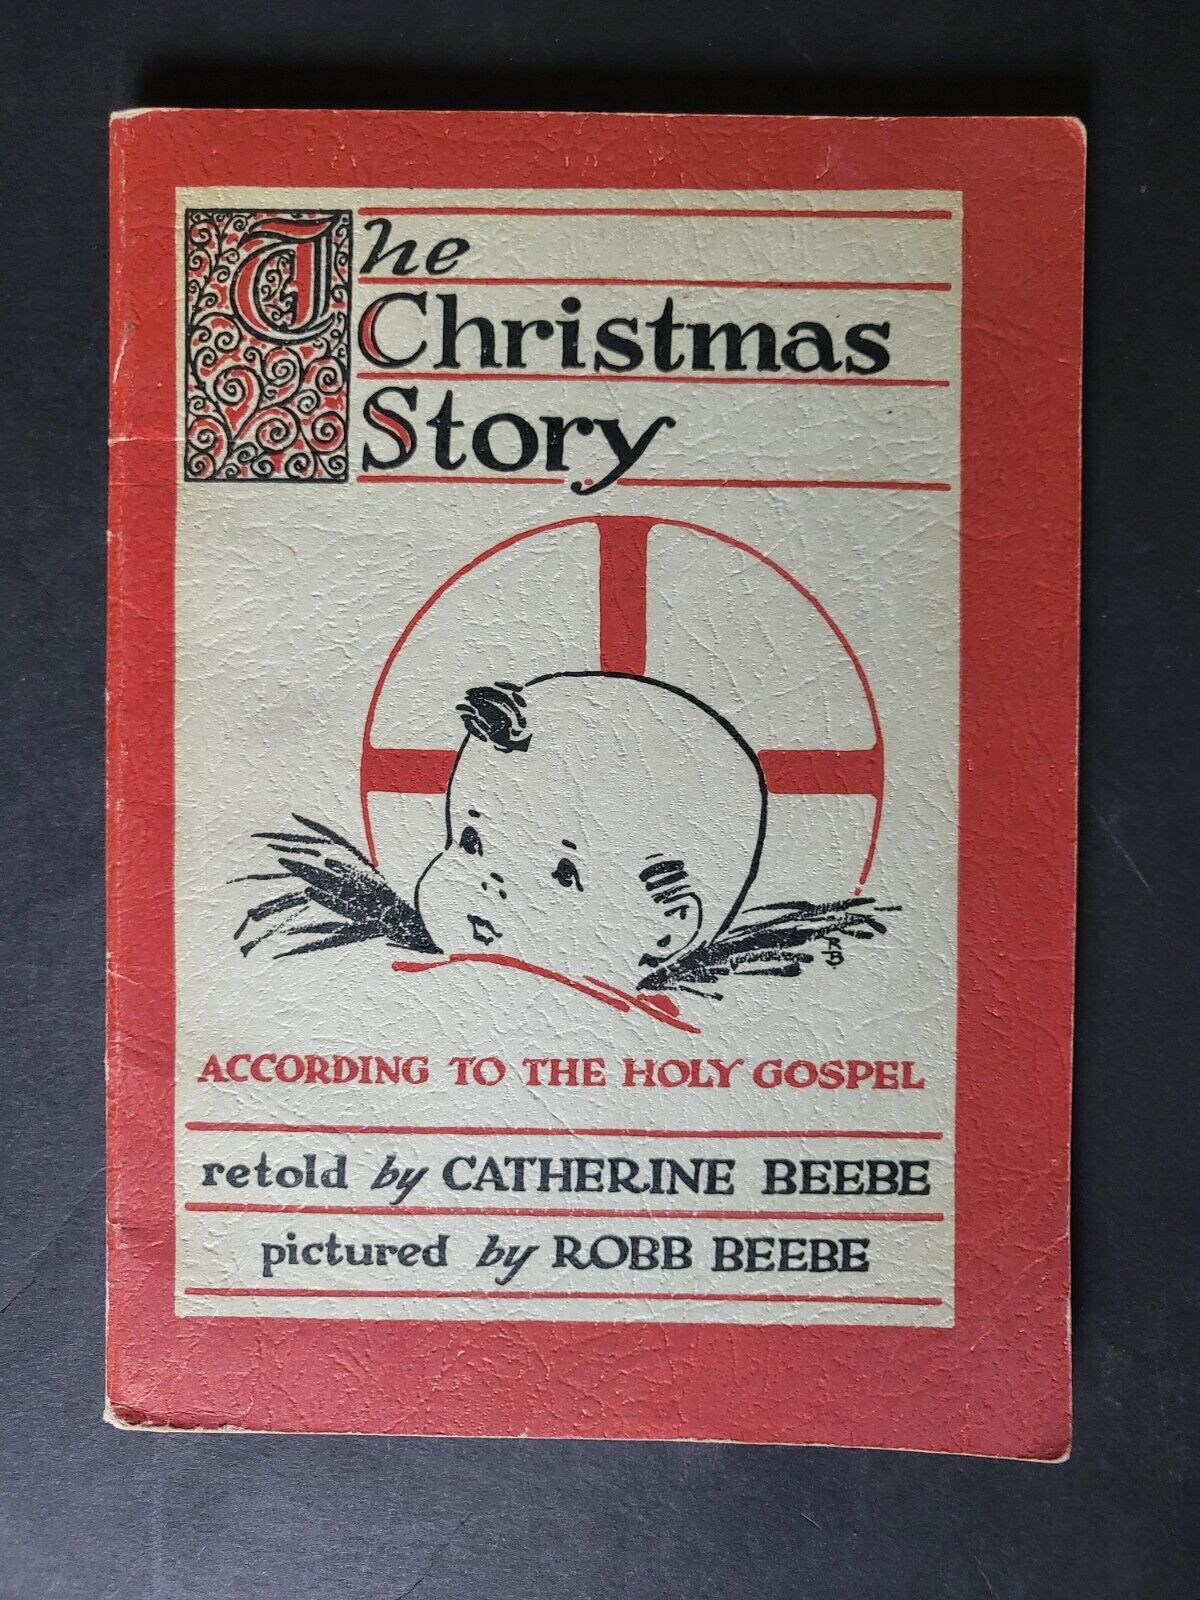 Vintage 1940 The Christmas Story According To The Holy Gospel -VERY RARE Book